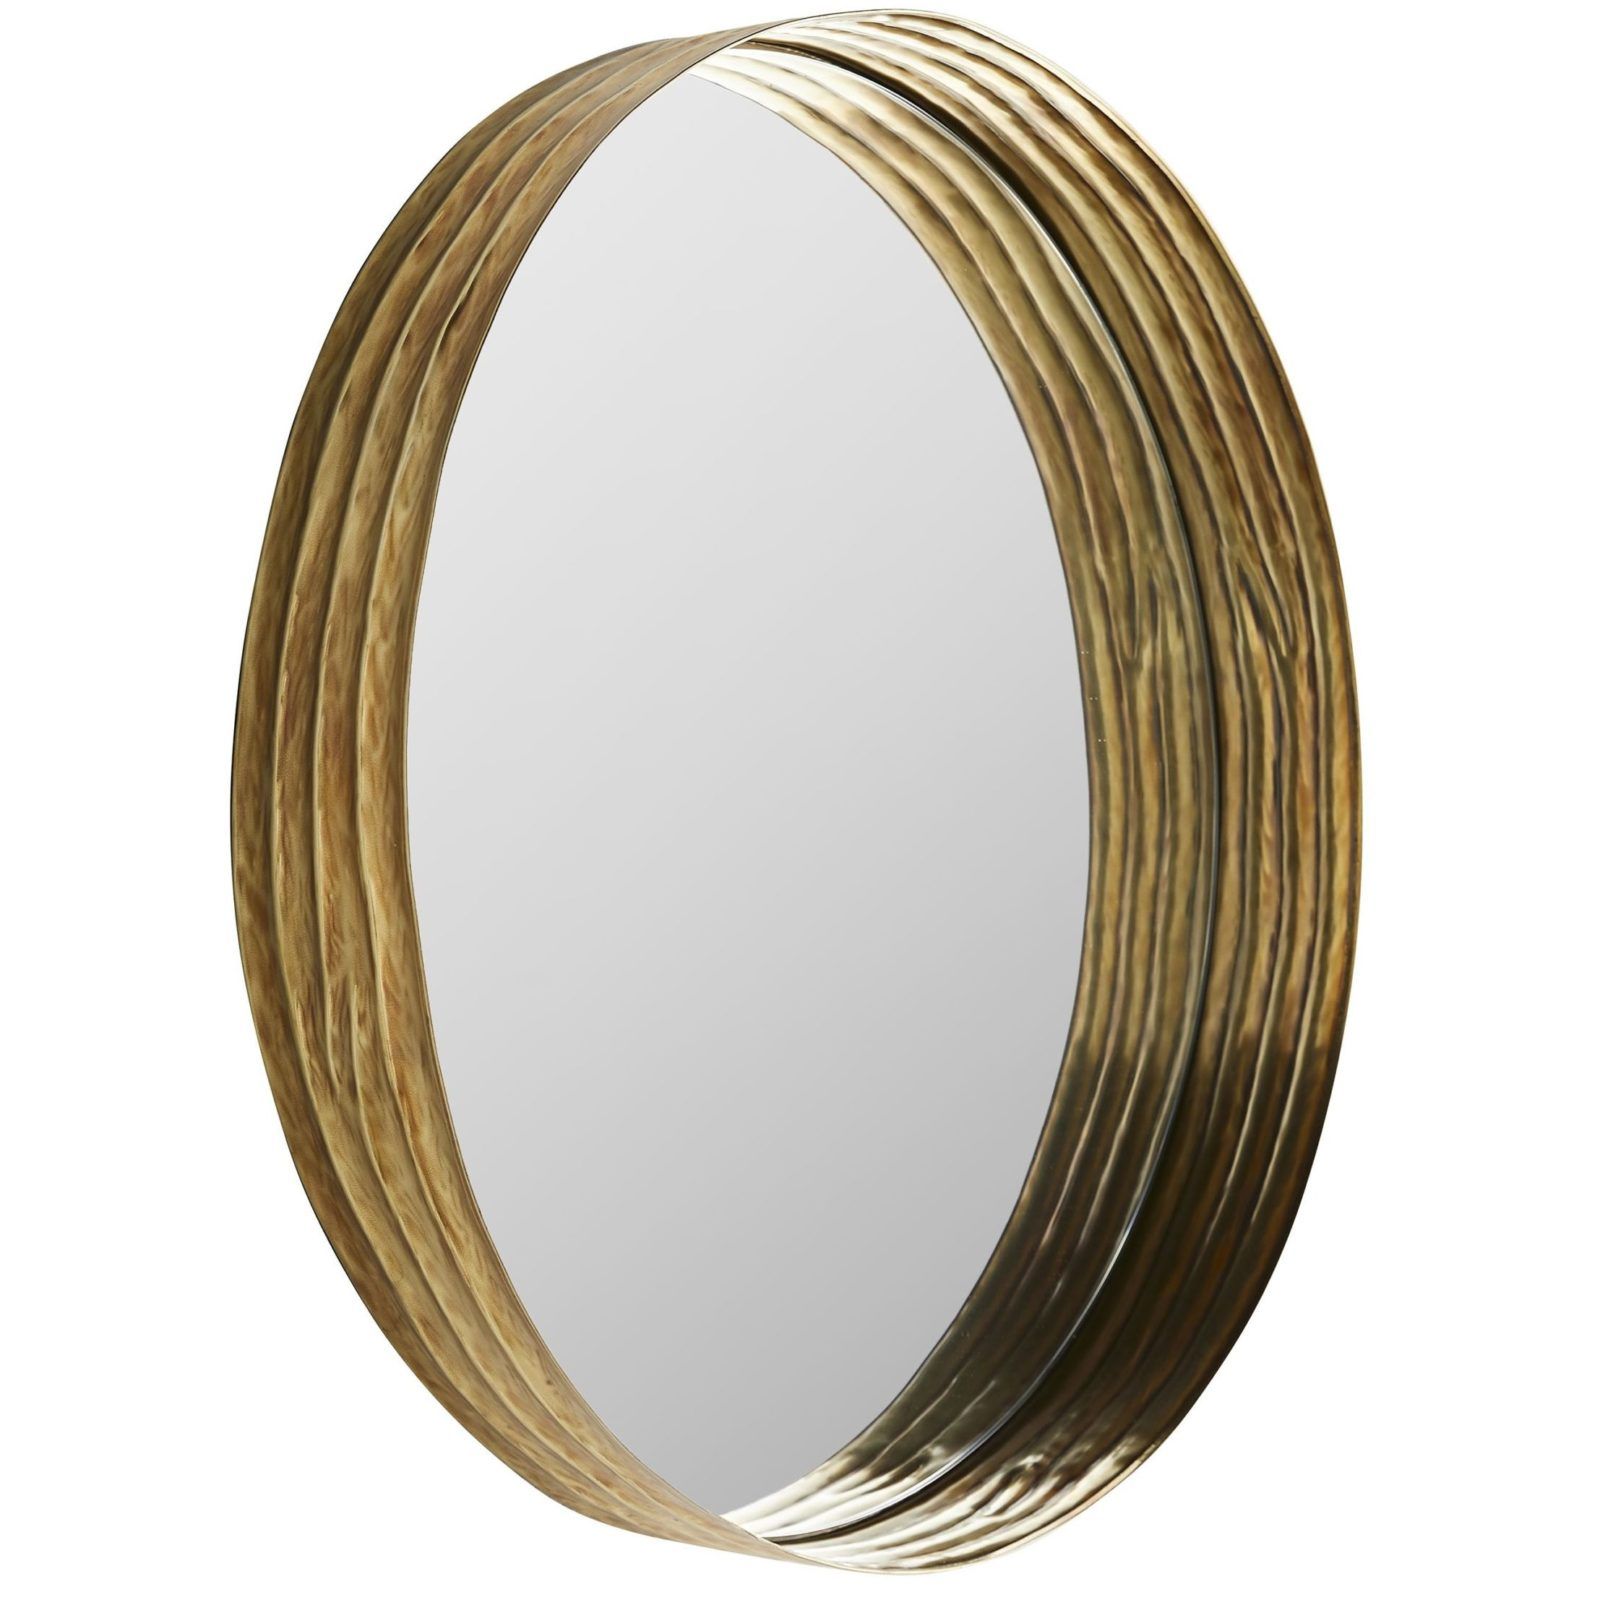 Round Gold Wall Mirror – Antique Brass Round Decorative Wall Mirror Inside Gold Rounded Edge Mirrors (View 4 of 15)